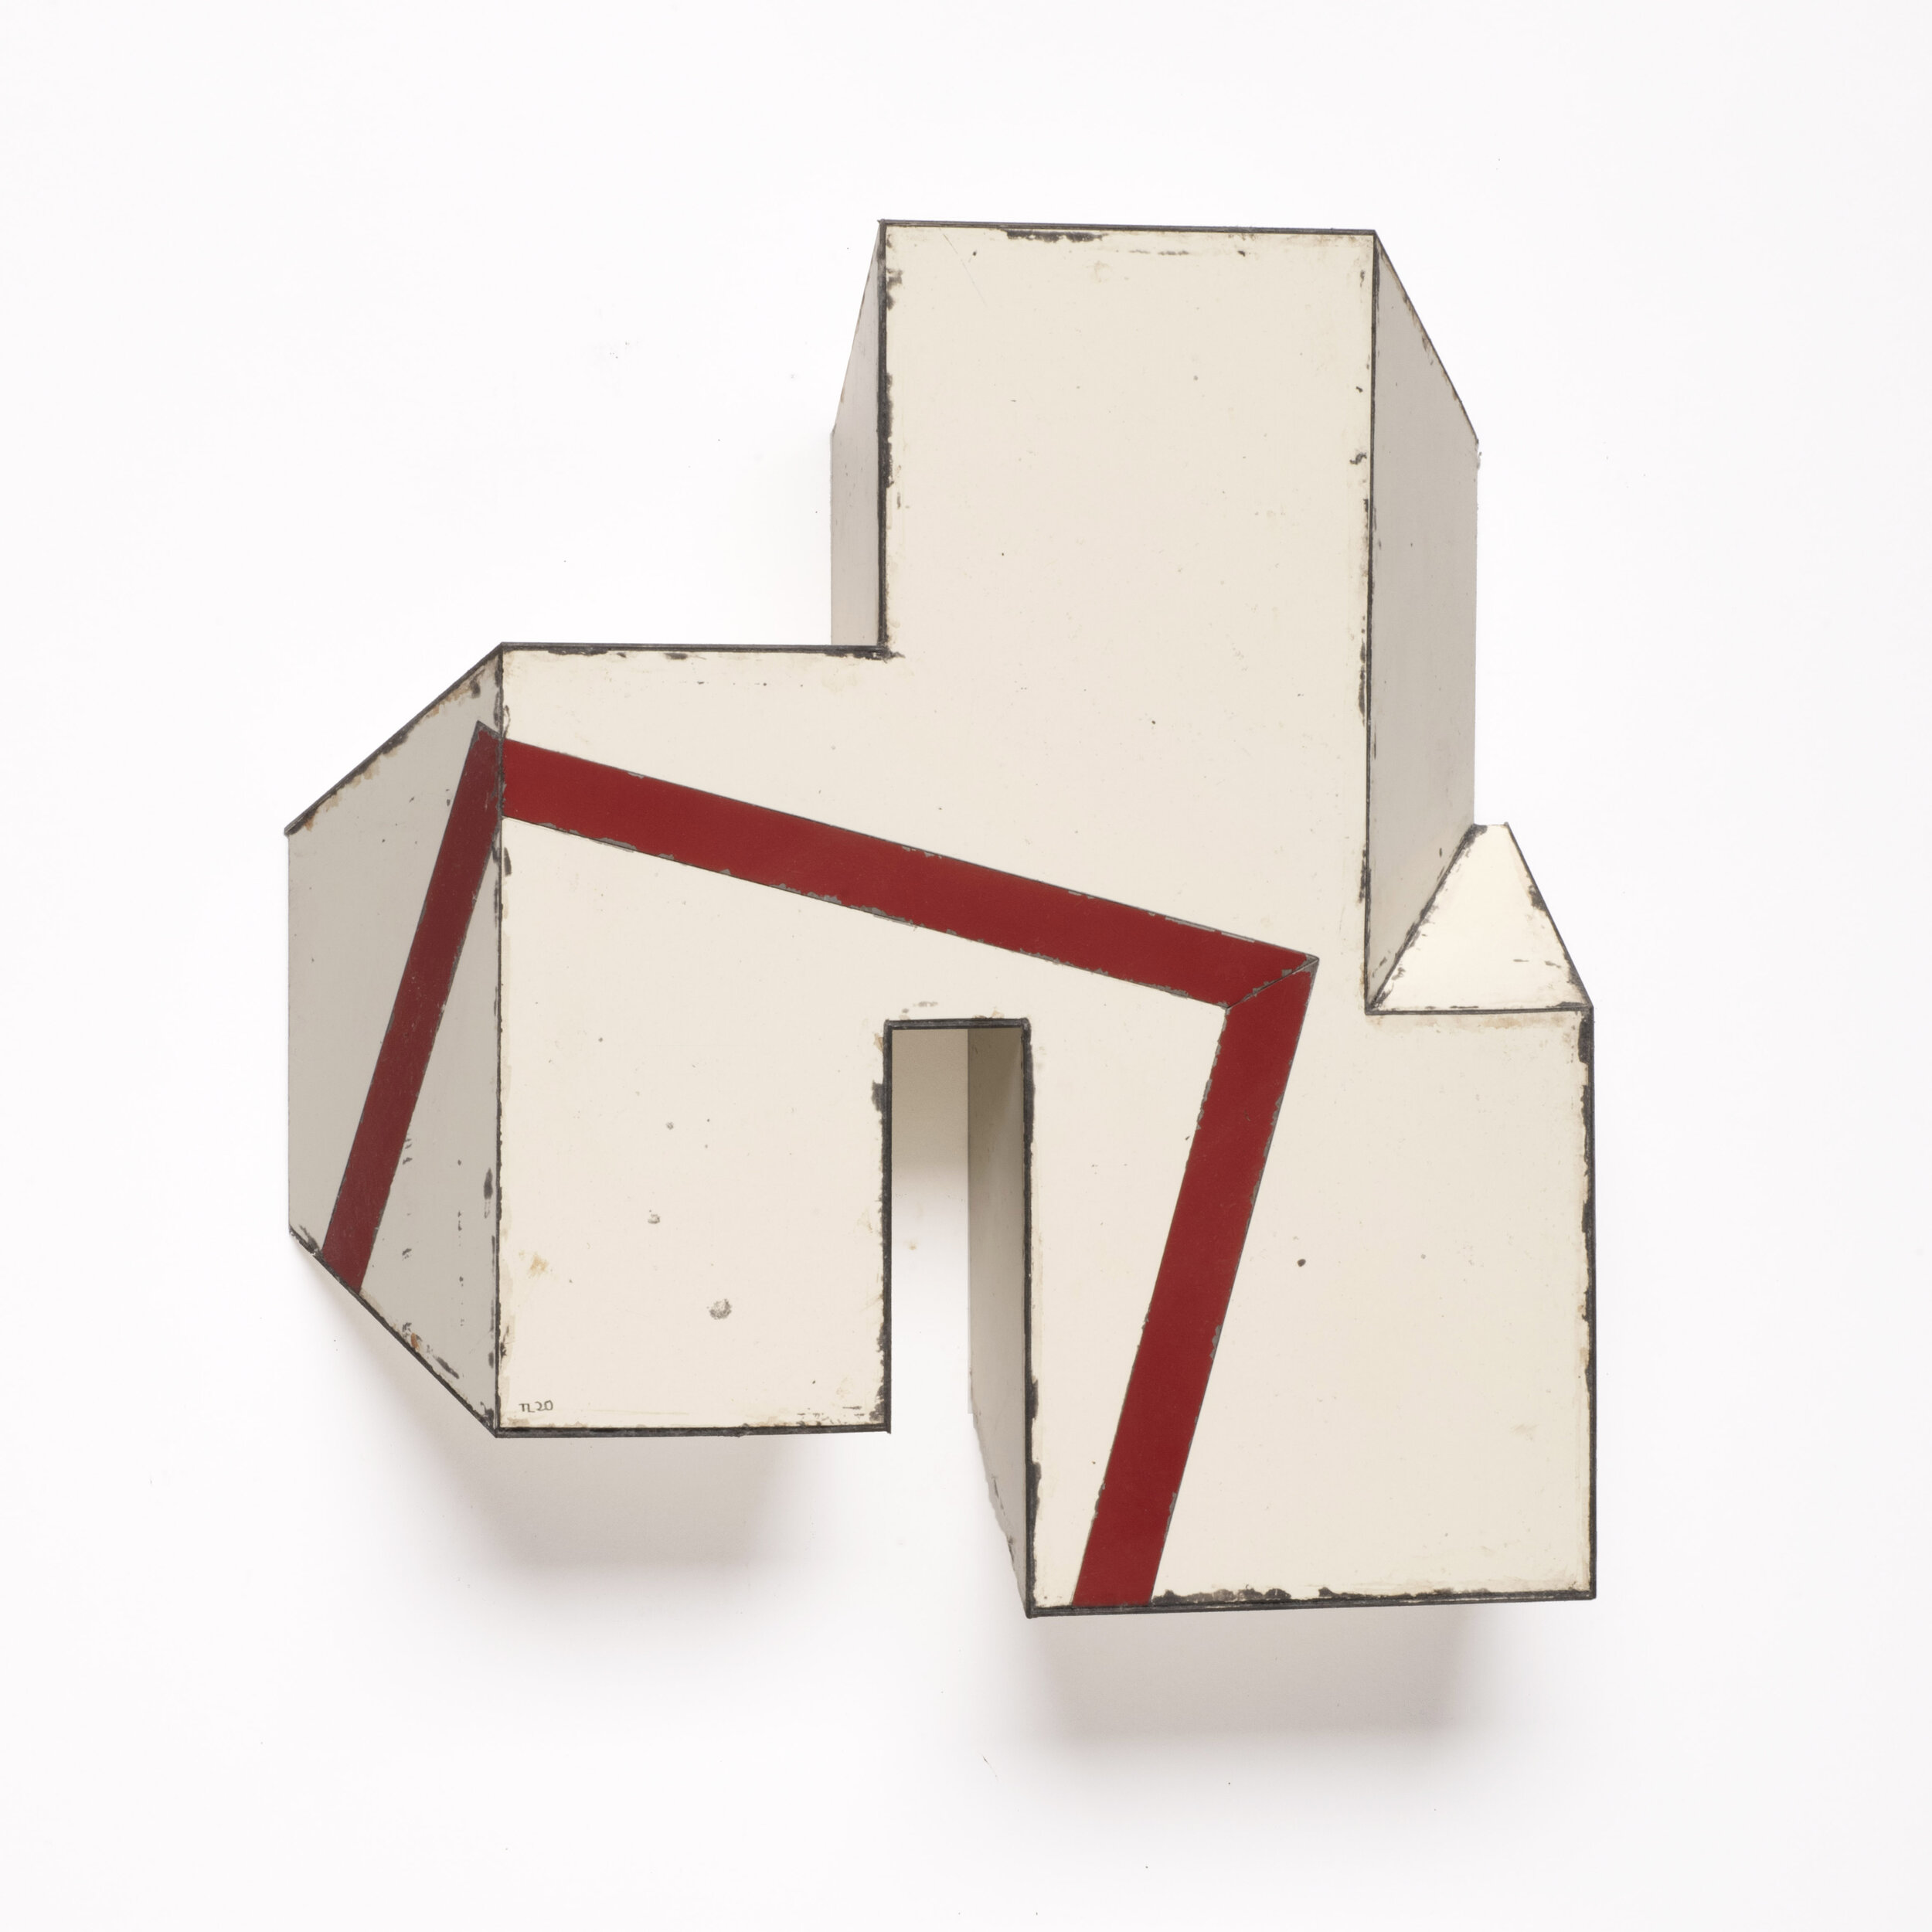 BOXED OUT | 9.5 x 9 x 2.25 in / 24 x 23 x 5.75 cm, salvage steel, marine-grade plywood, silicone, vulcanized rubber, hardware, 2020